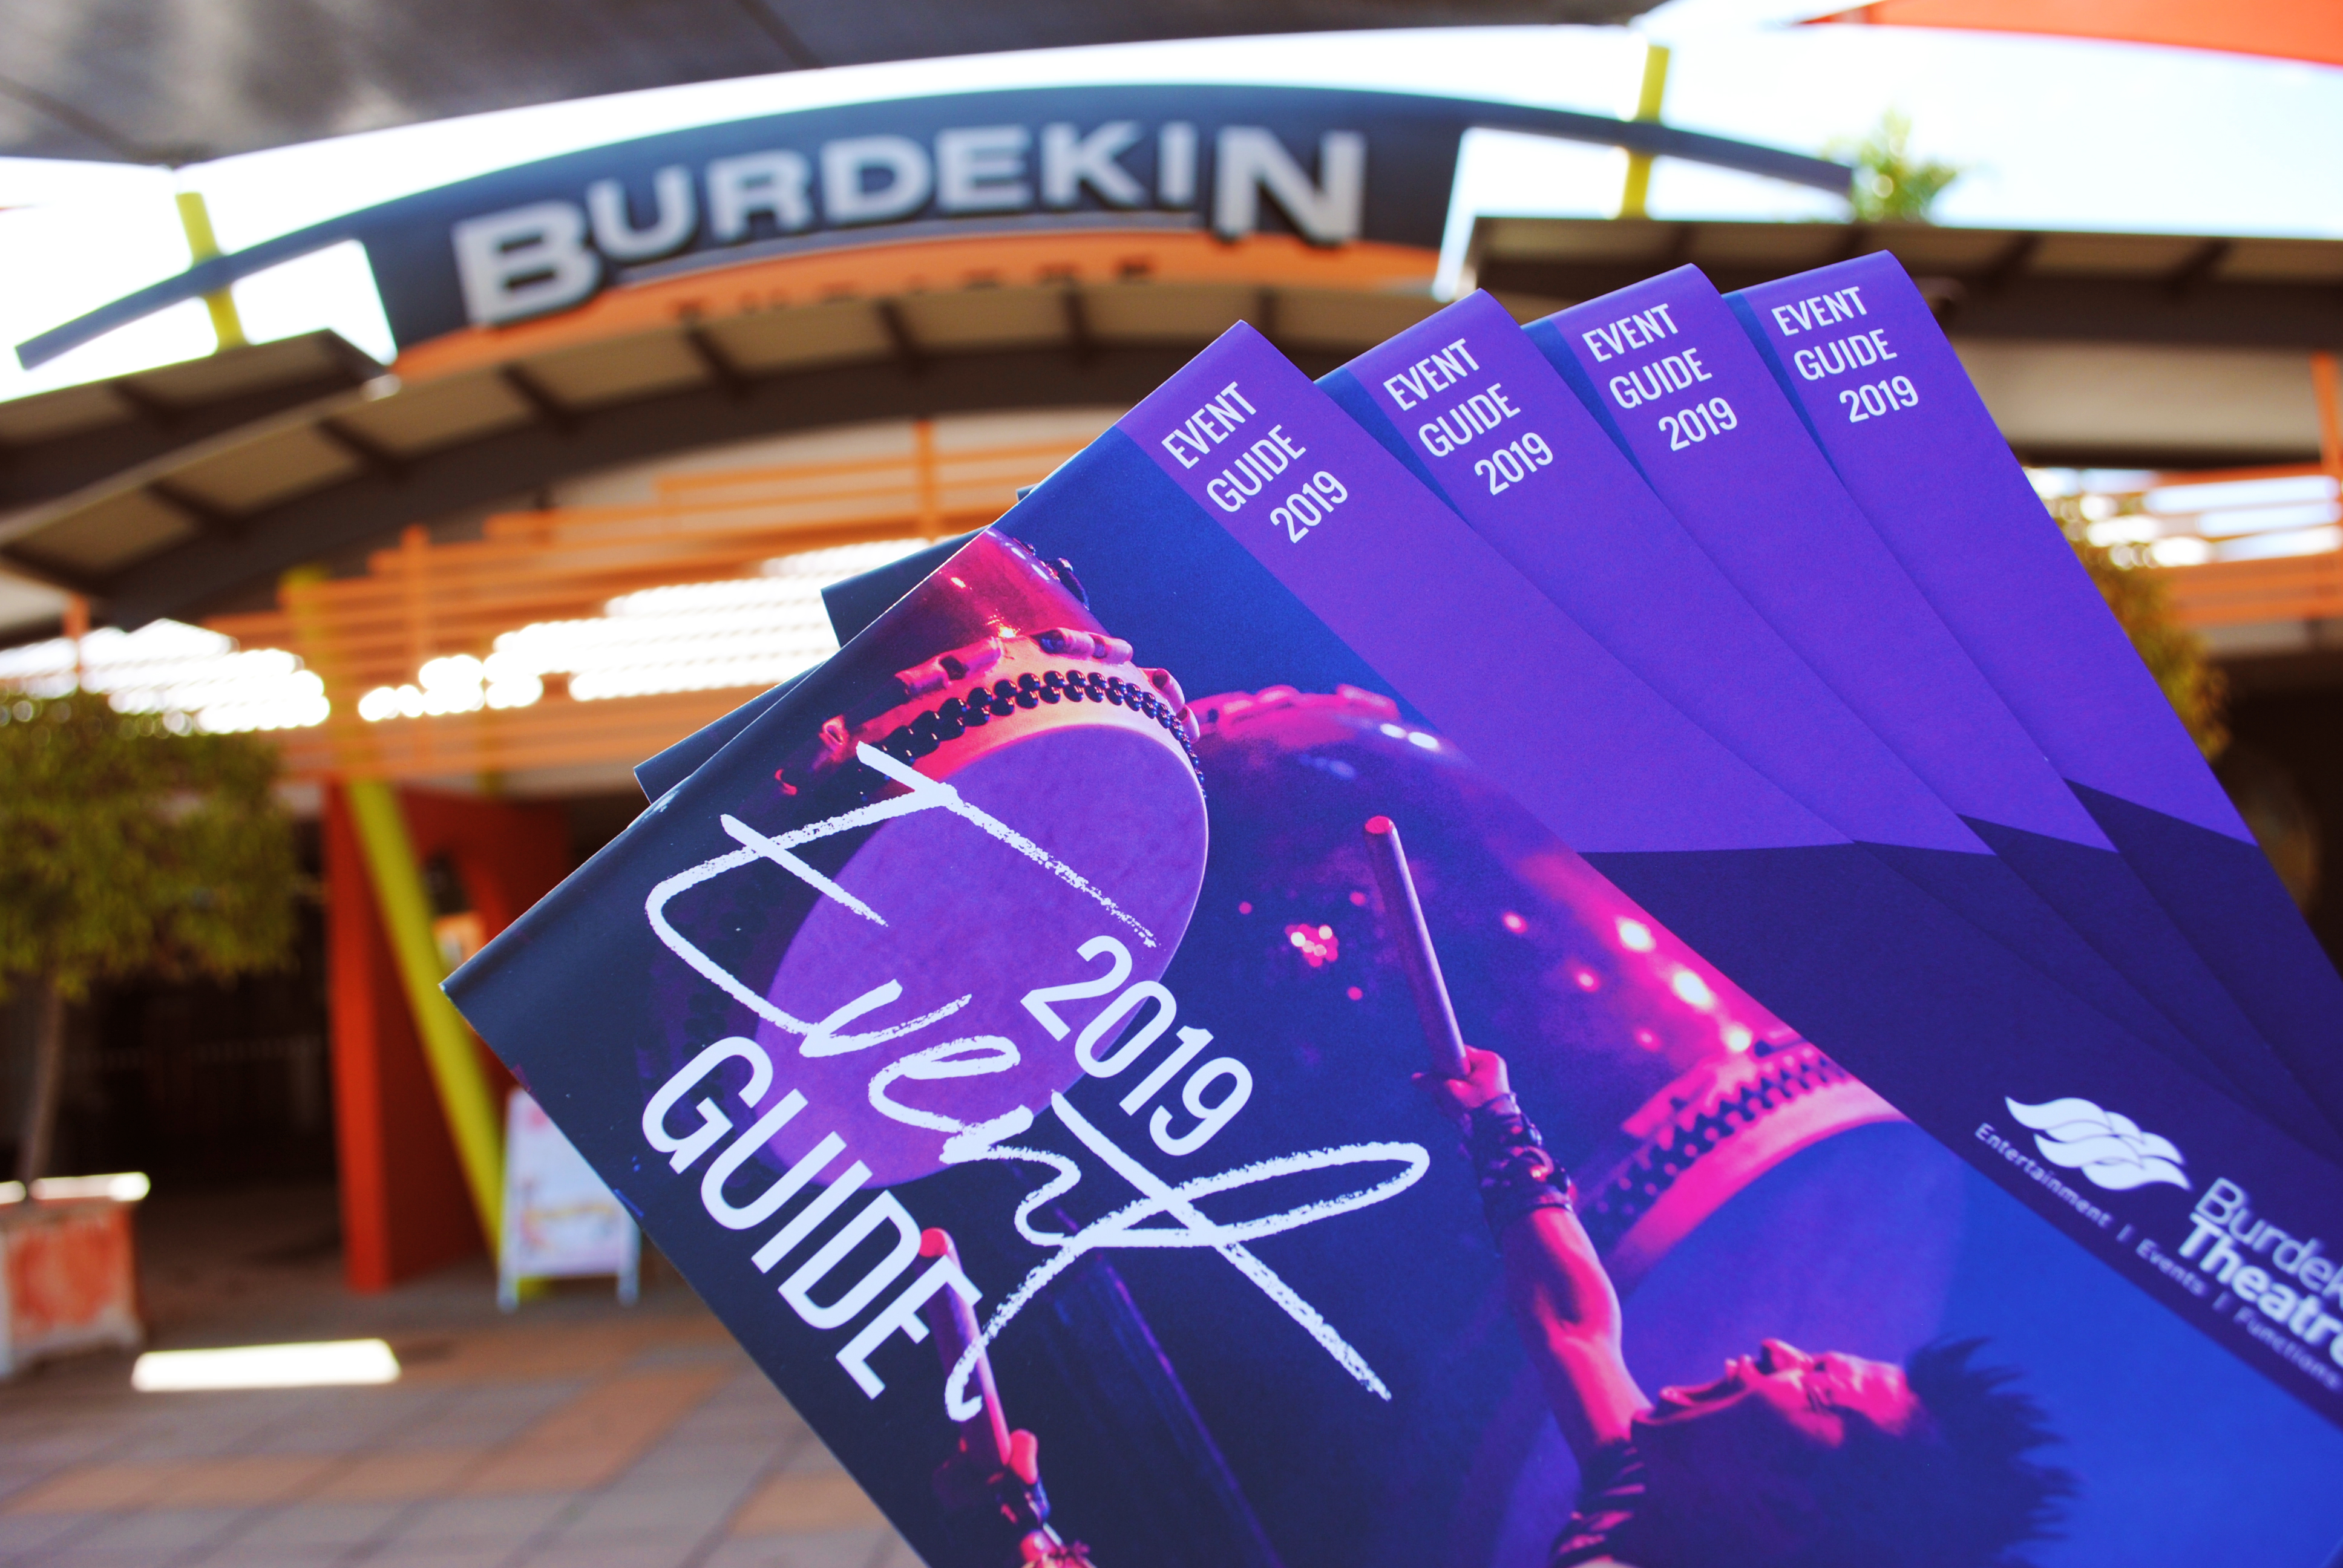 Purple booklets being held up in front of Burdekin Theatre front signage